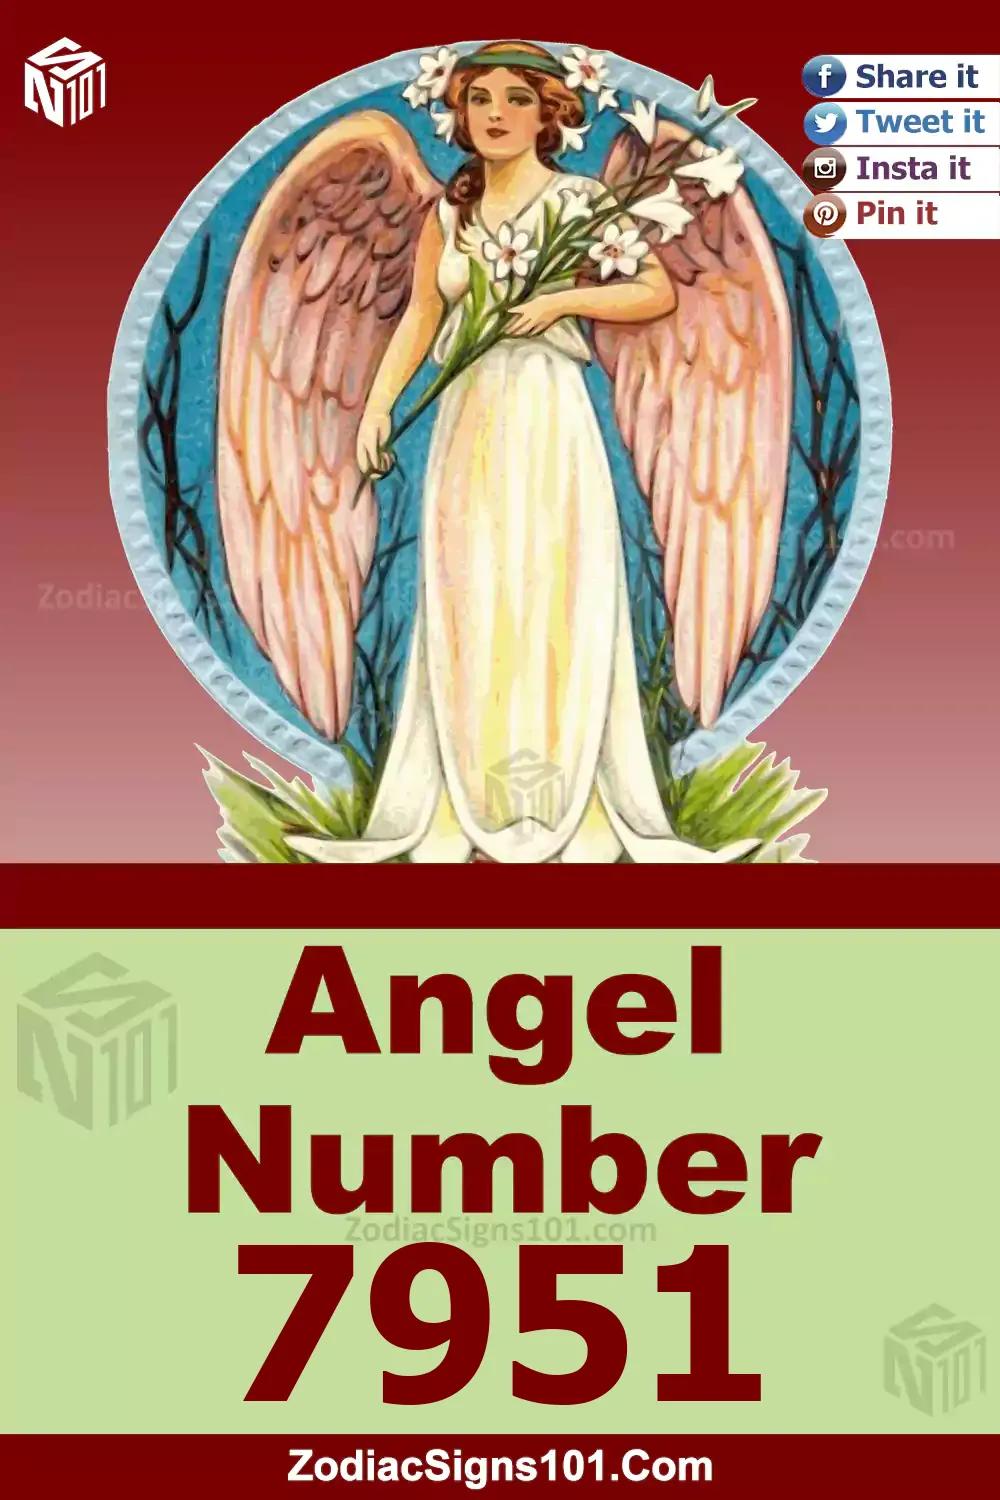 7951 Angel Number Meaning